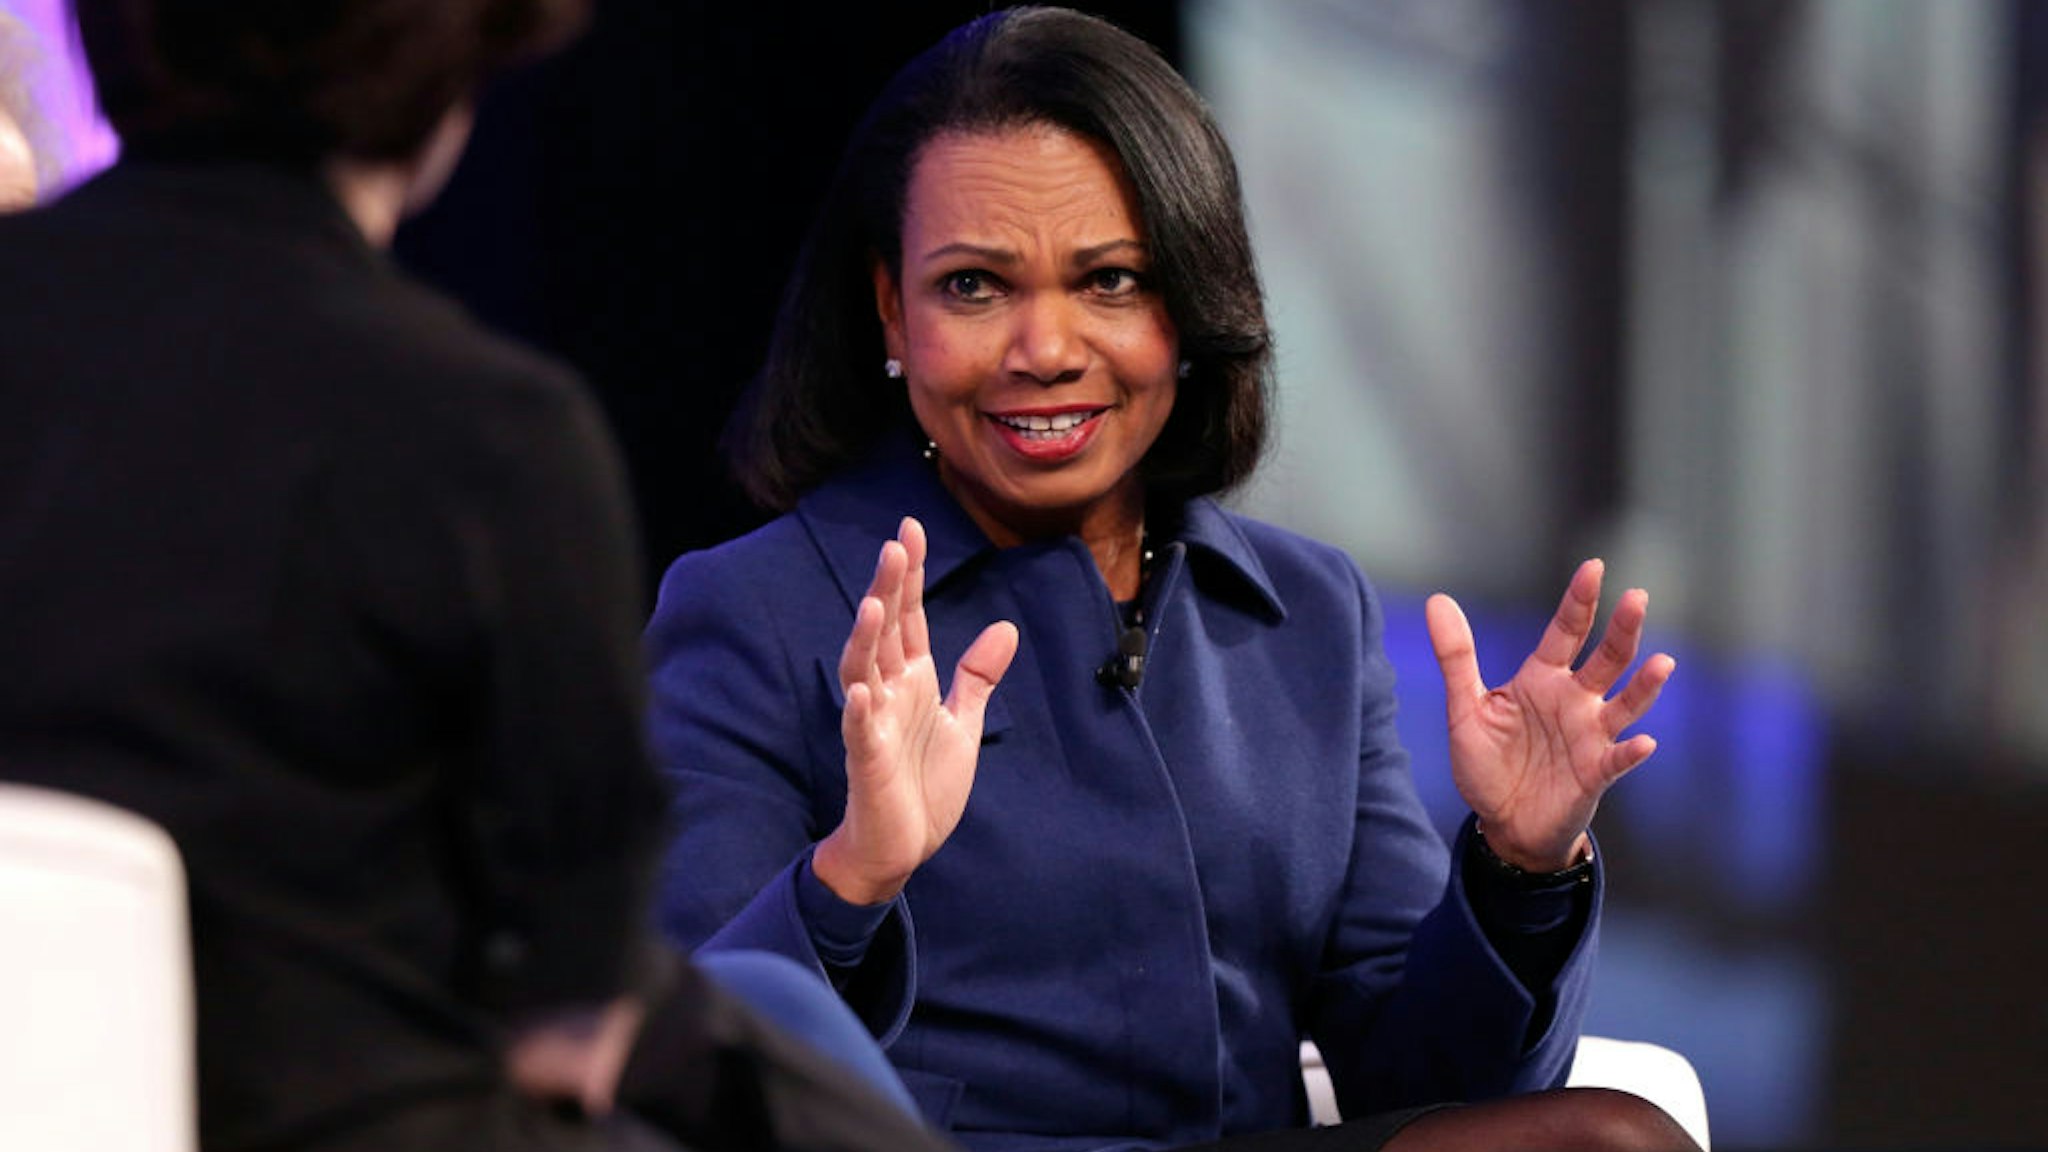 Condoleezza Rice speaks at the Watermark Conference for Women at San Jose Convention Center